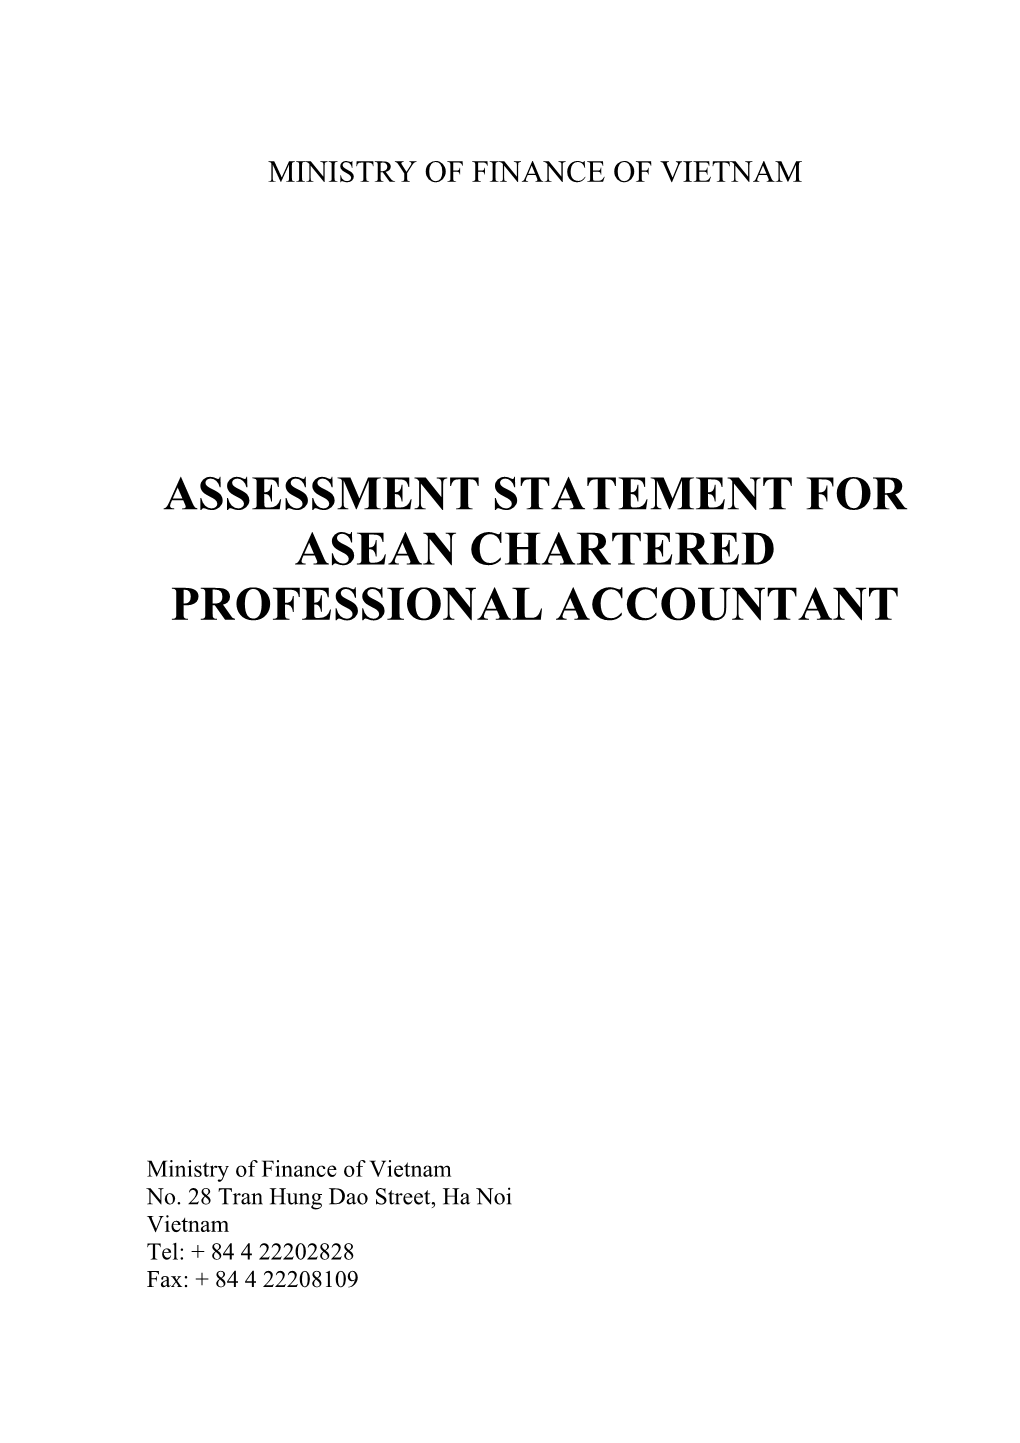 Assessment Statement for Asean Chartered Professional Accountant